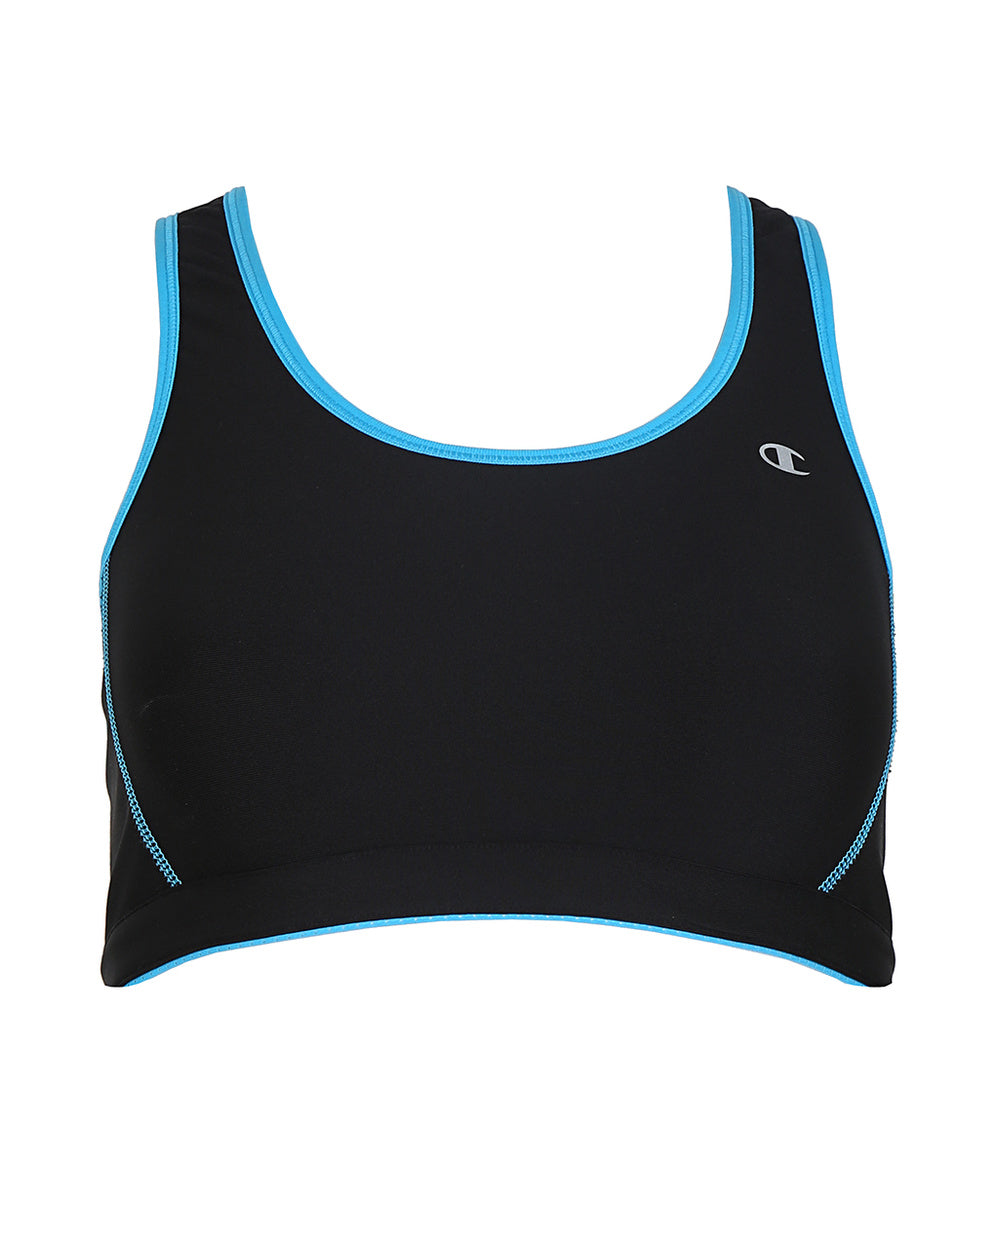 Champion Black & Blue Cropped Sports Top - S